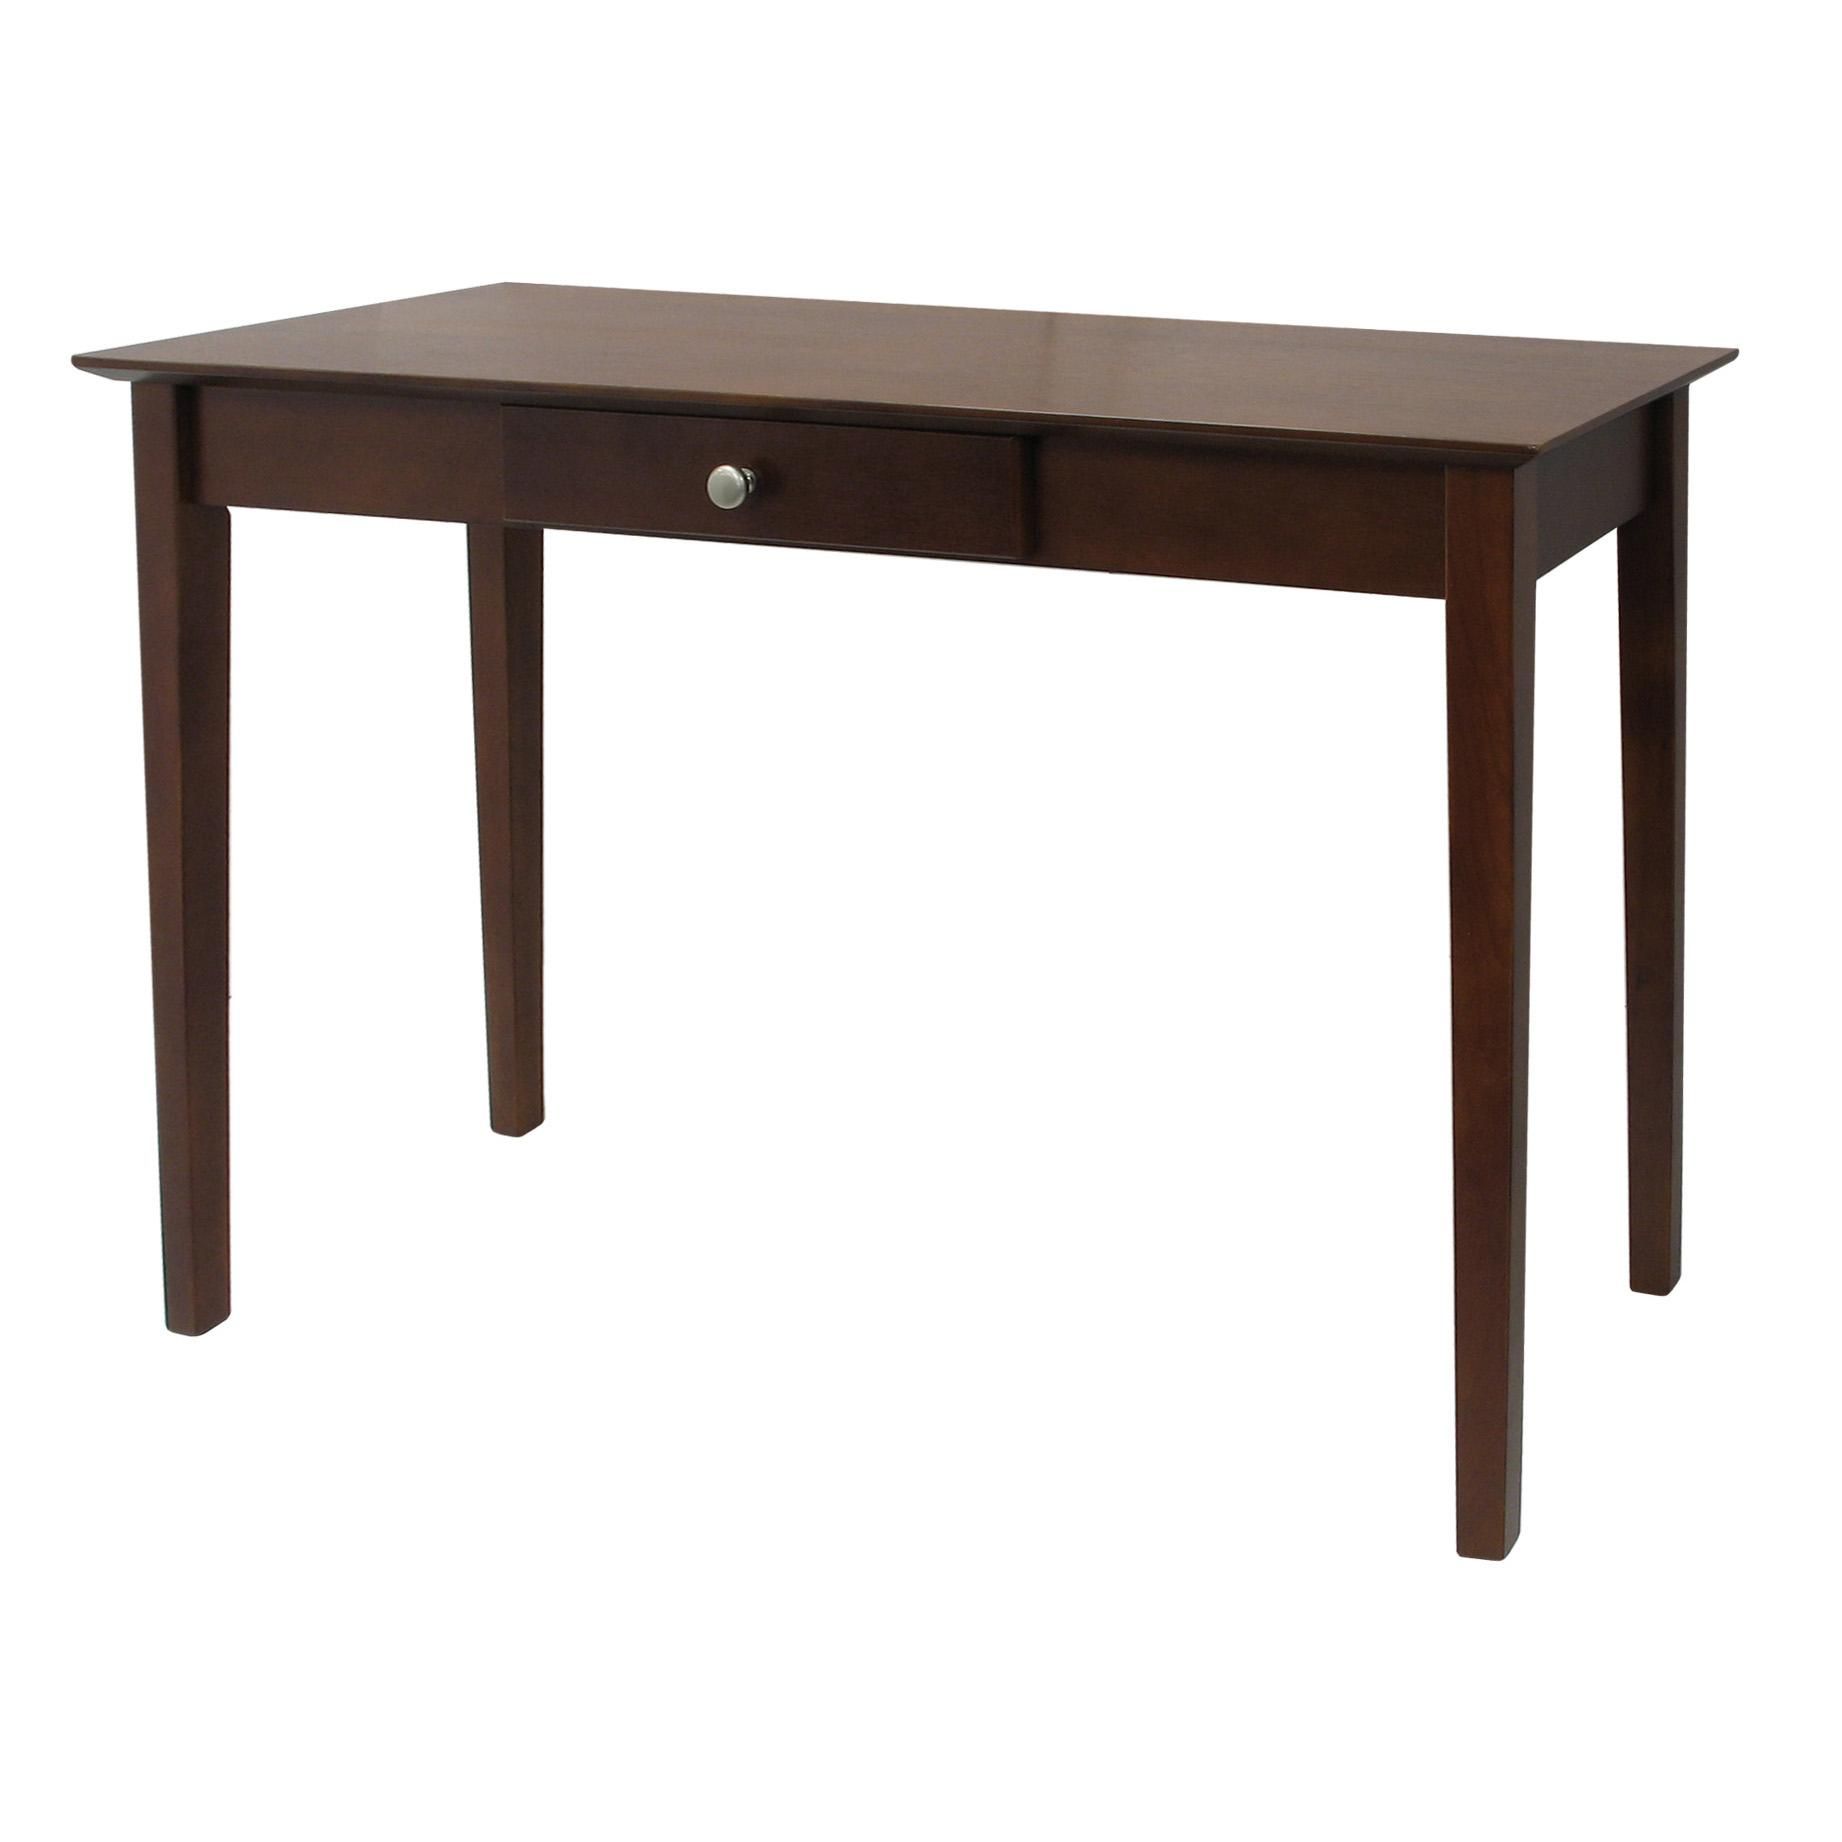 Sofa Table: Luxurious Sofa Table Desk Ideas Console Tables Ikea Intended For Parsons Walnut Top & Dark Steel Base 48x16 Console Tables (View 15 of 30)